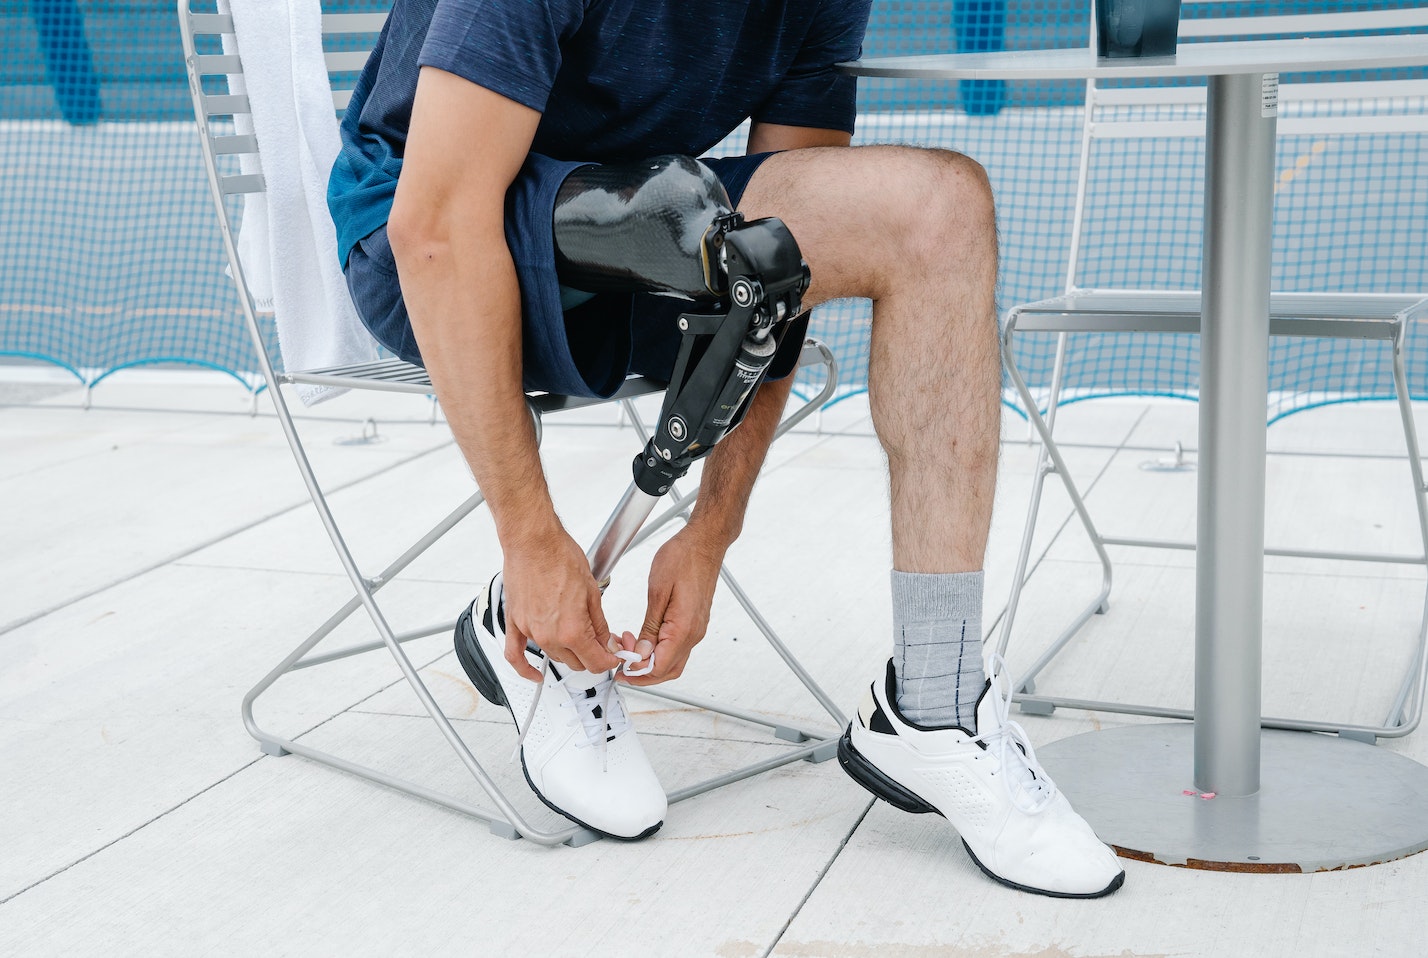 Prosthetic Knee Systems